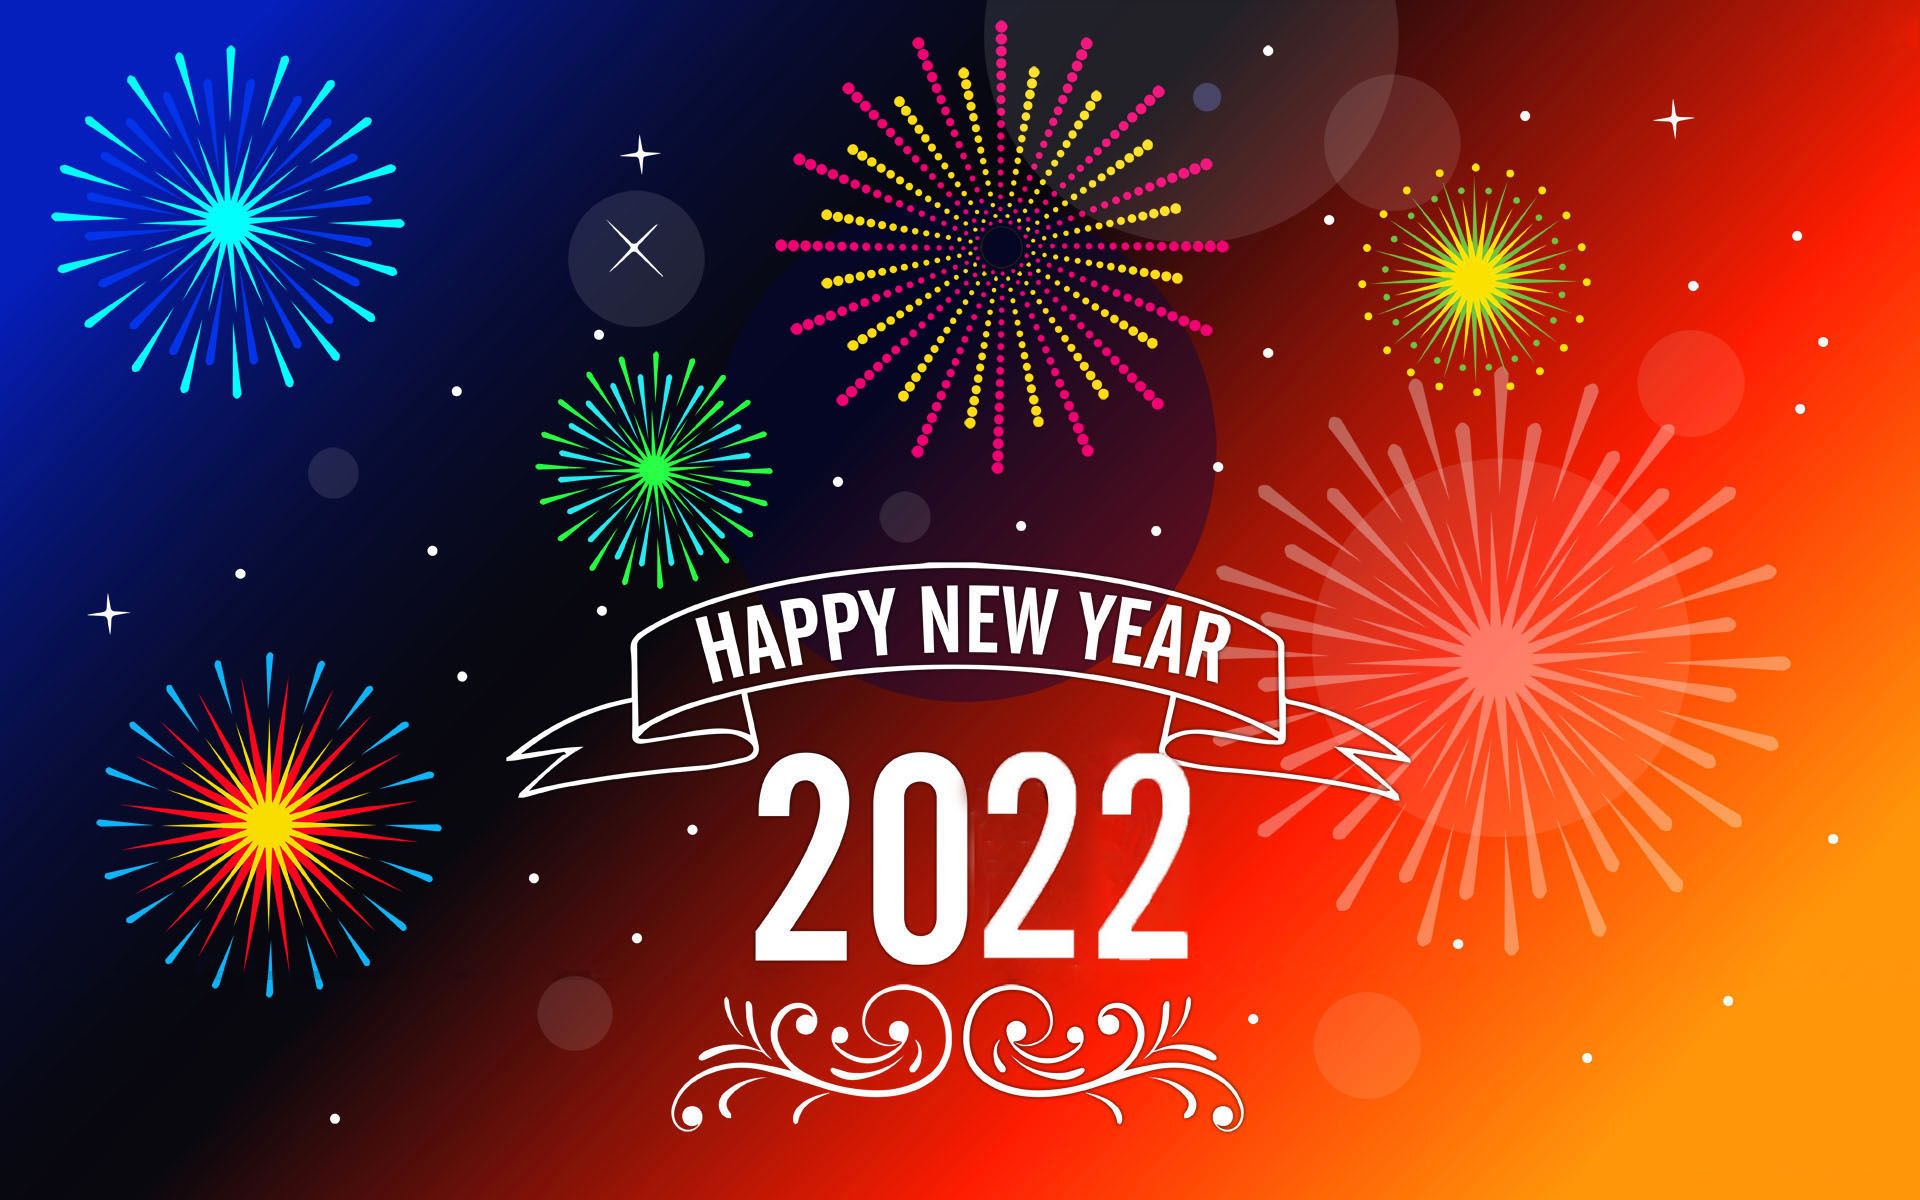 Happy New Year 2022 Messages Greeting Card Wallpaper Hd For Mobile 1920x1200